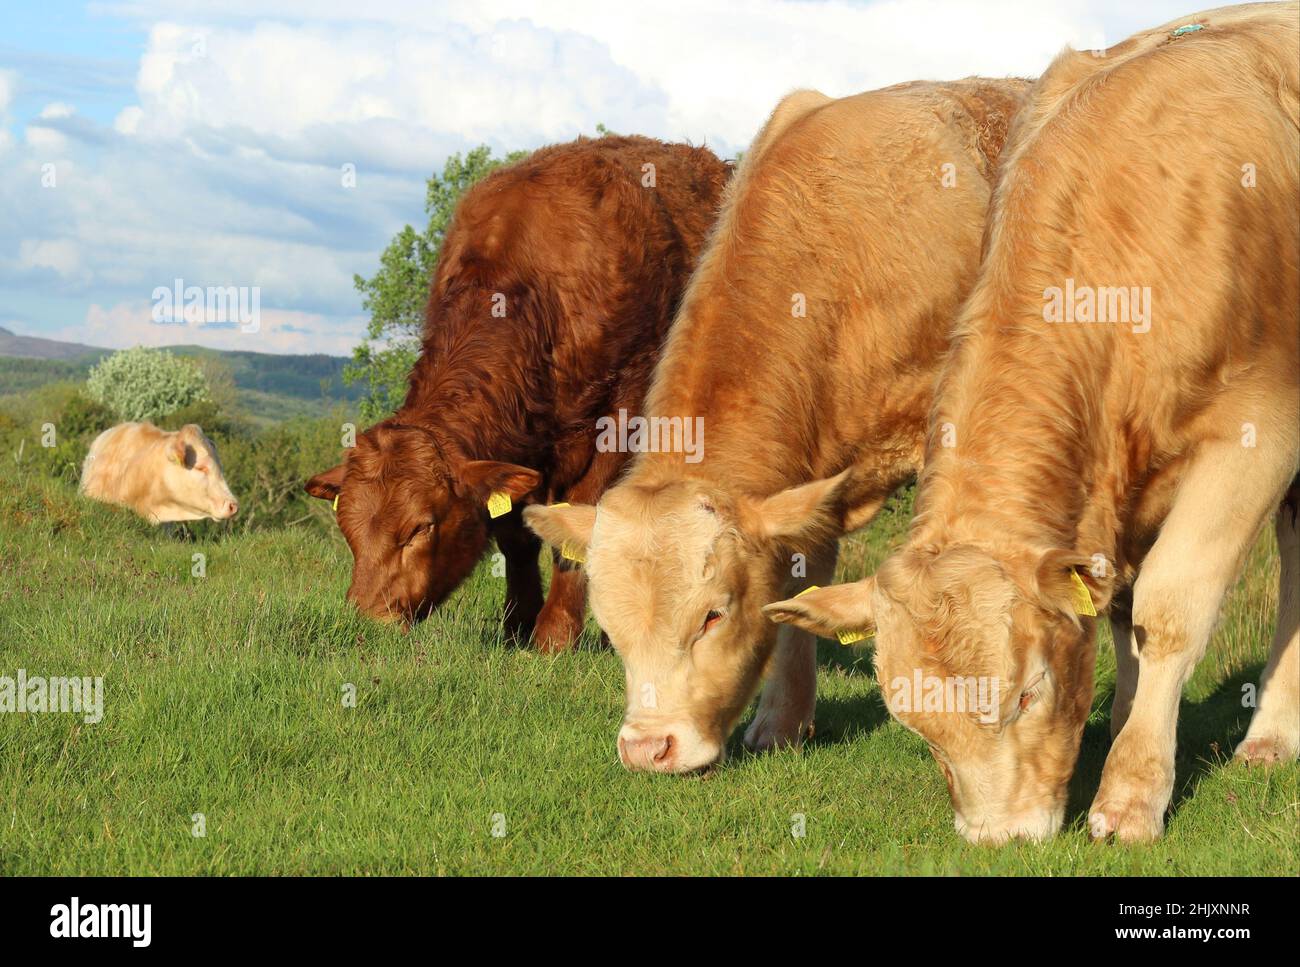 Charolais and Limousin breed cattle grazing in field on farmland in rural Ireland Stock Photo